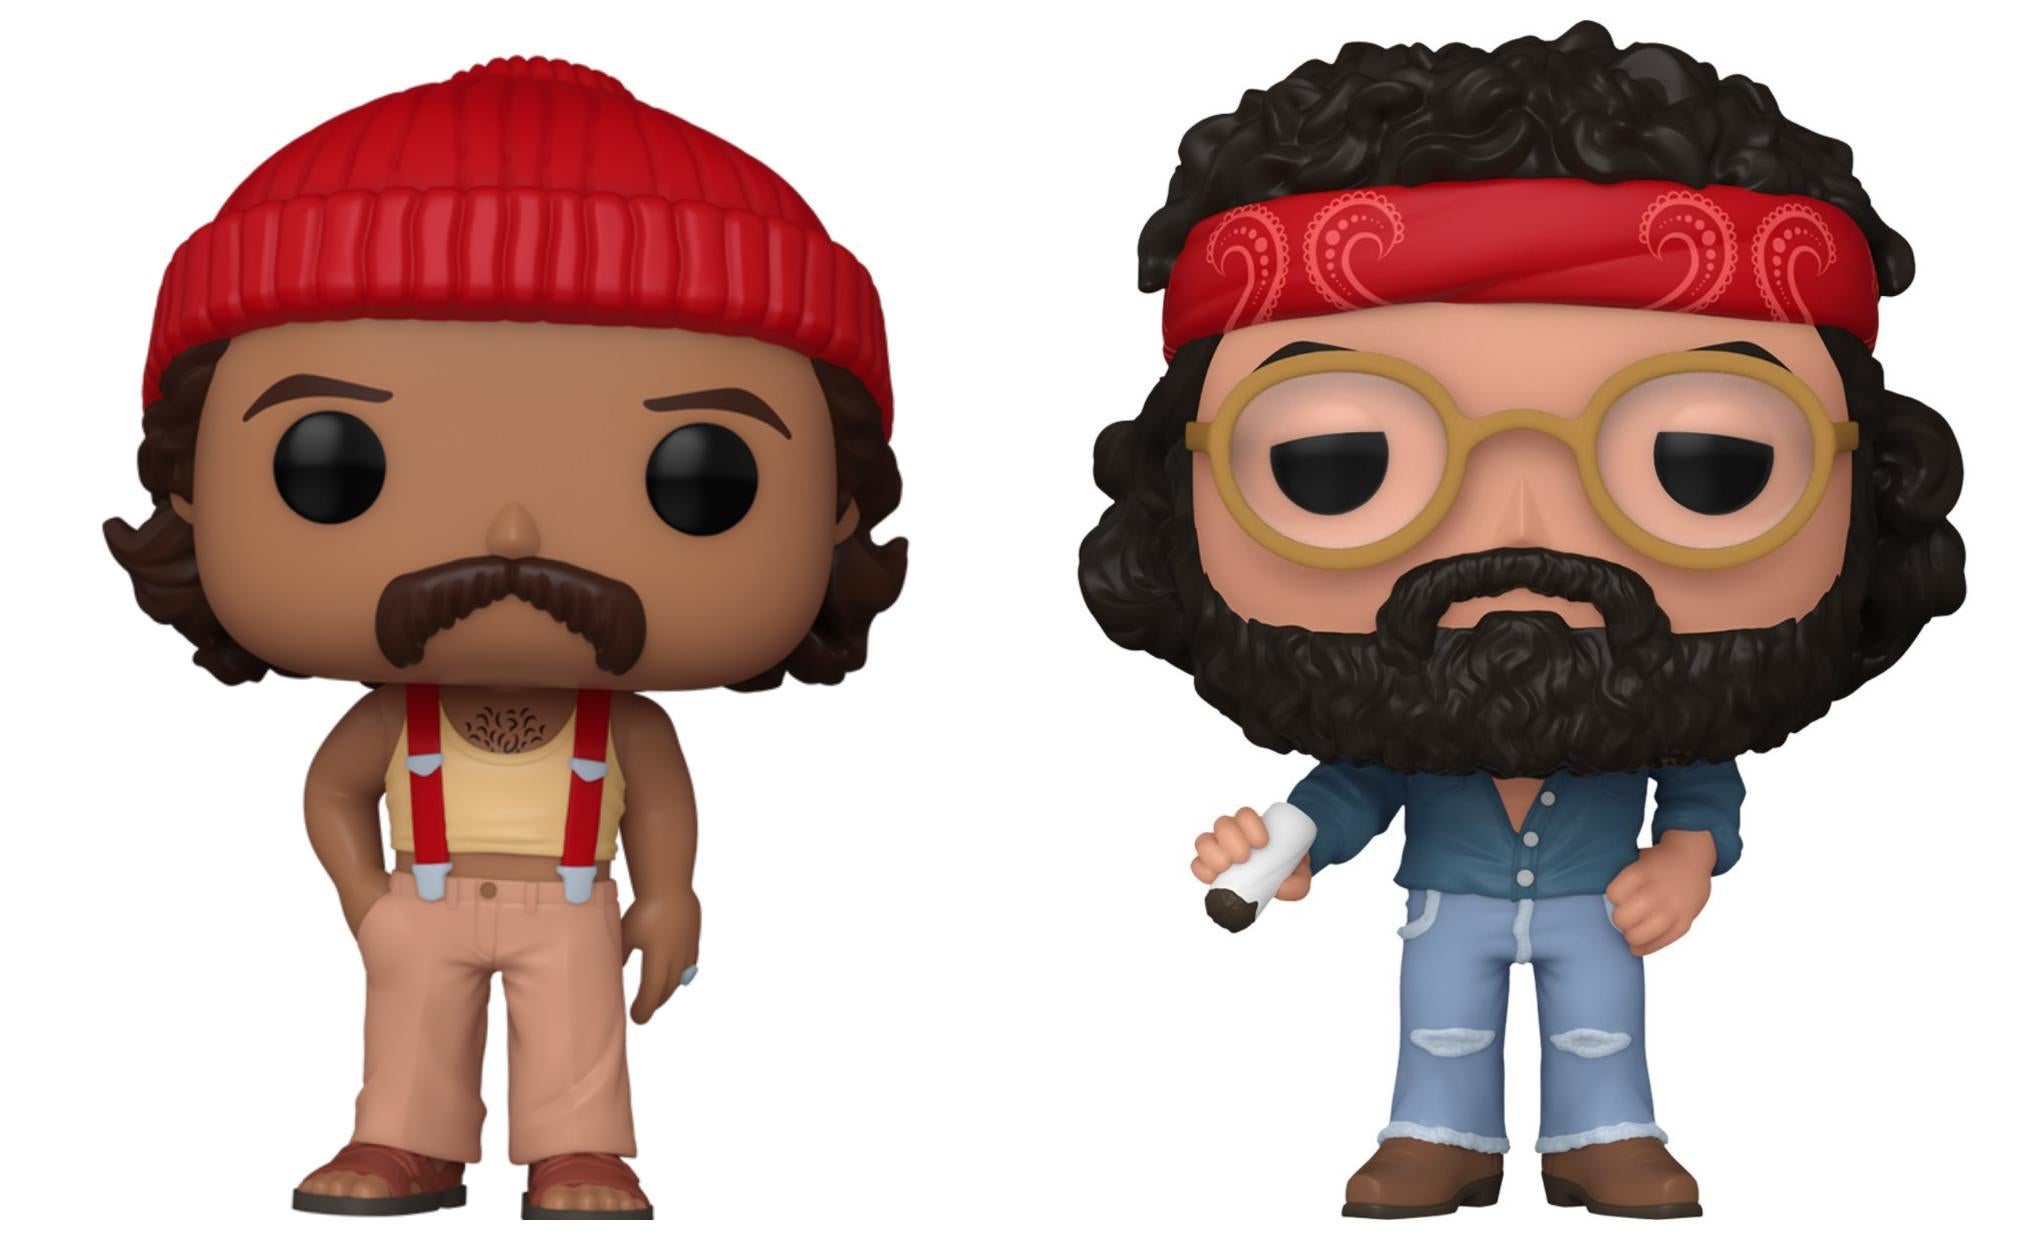 Cheech & Chong Funko Pop Figures Are Here and It's Not Even 4/20